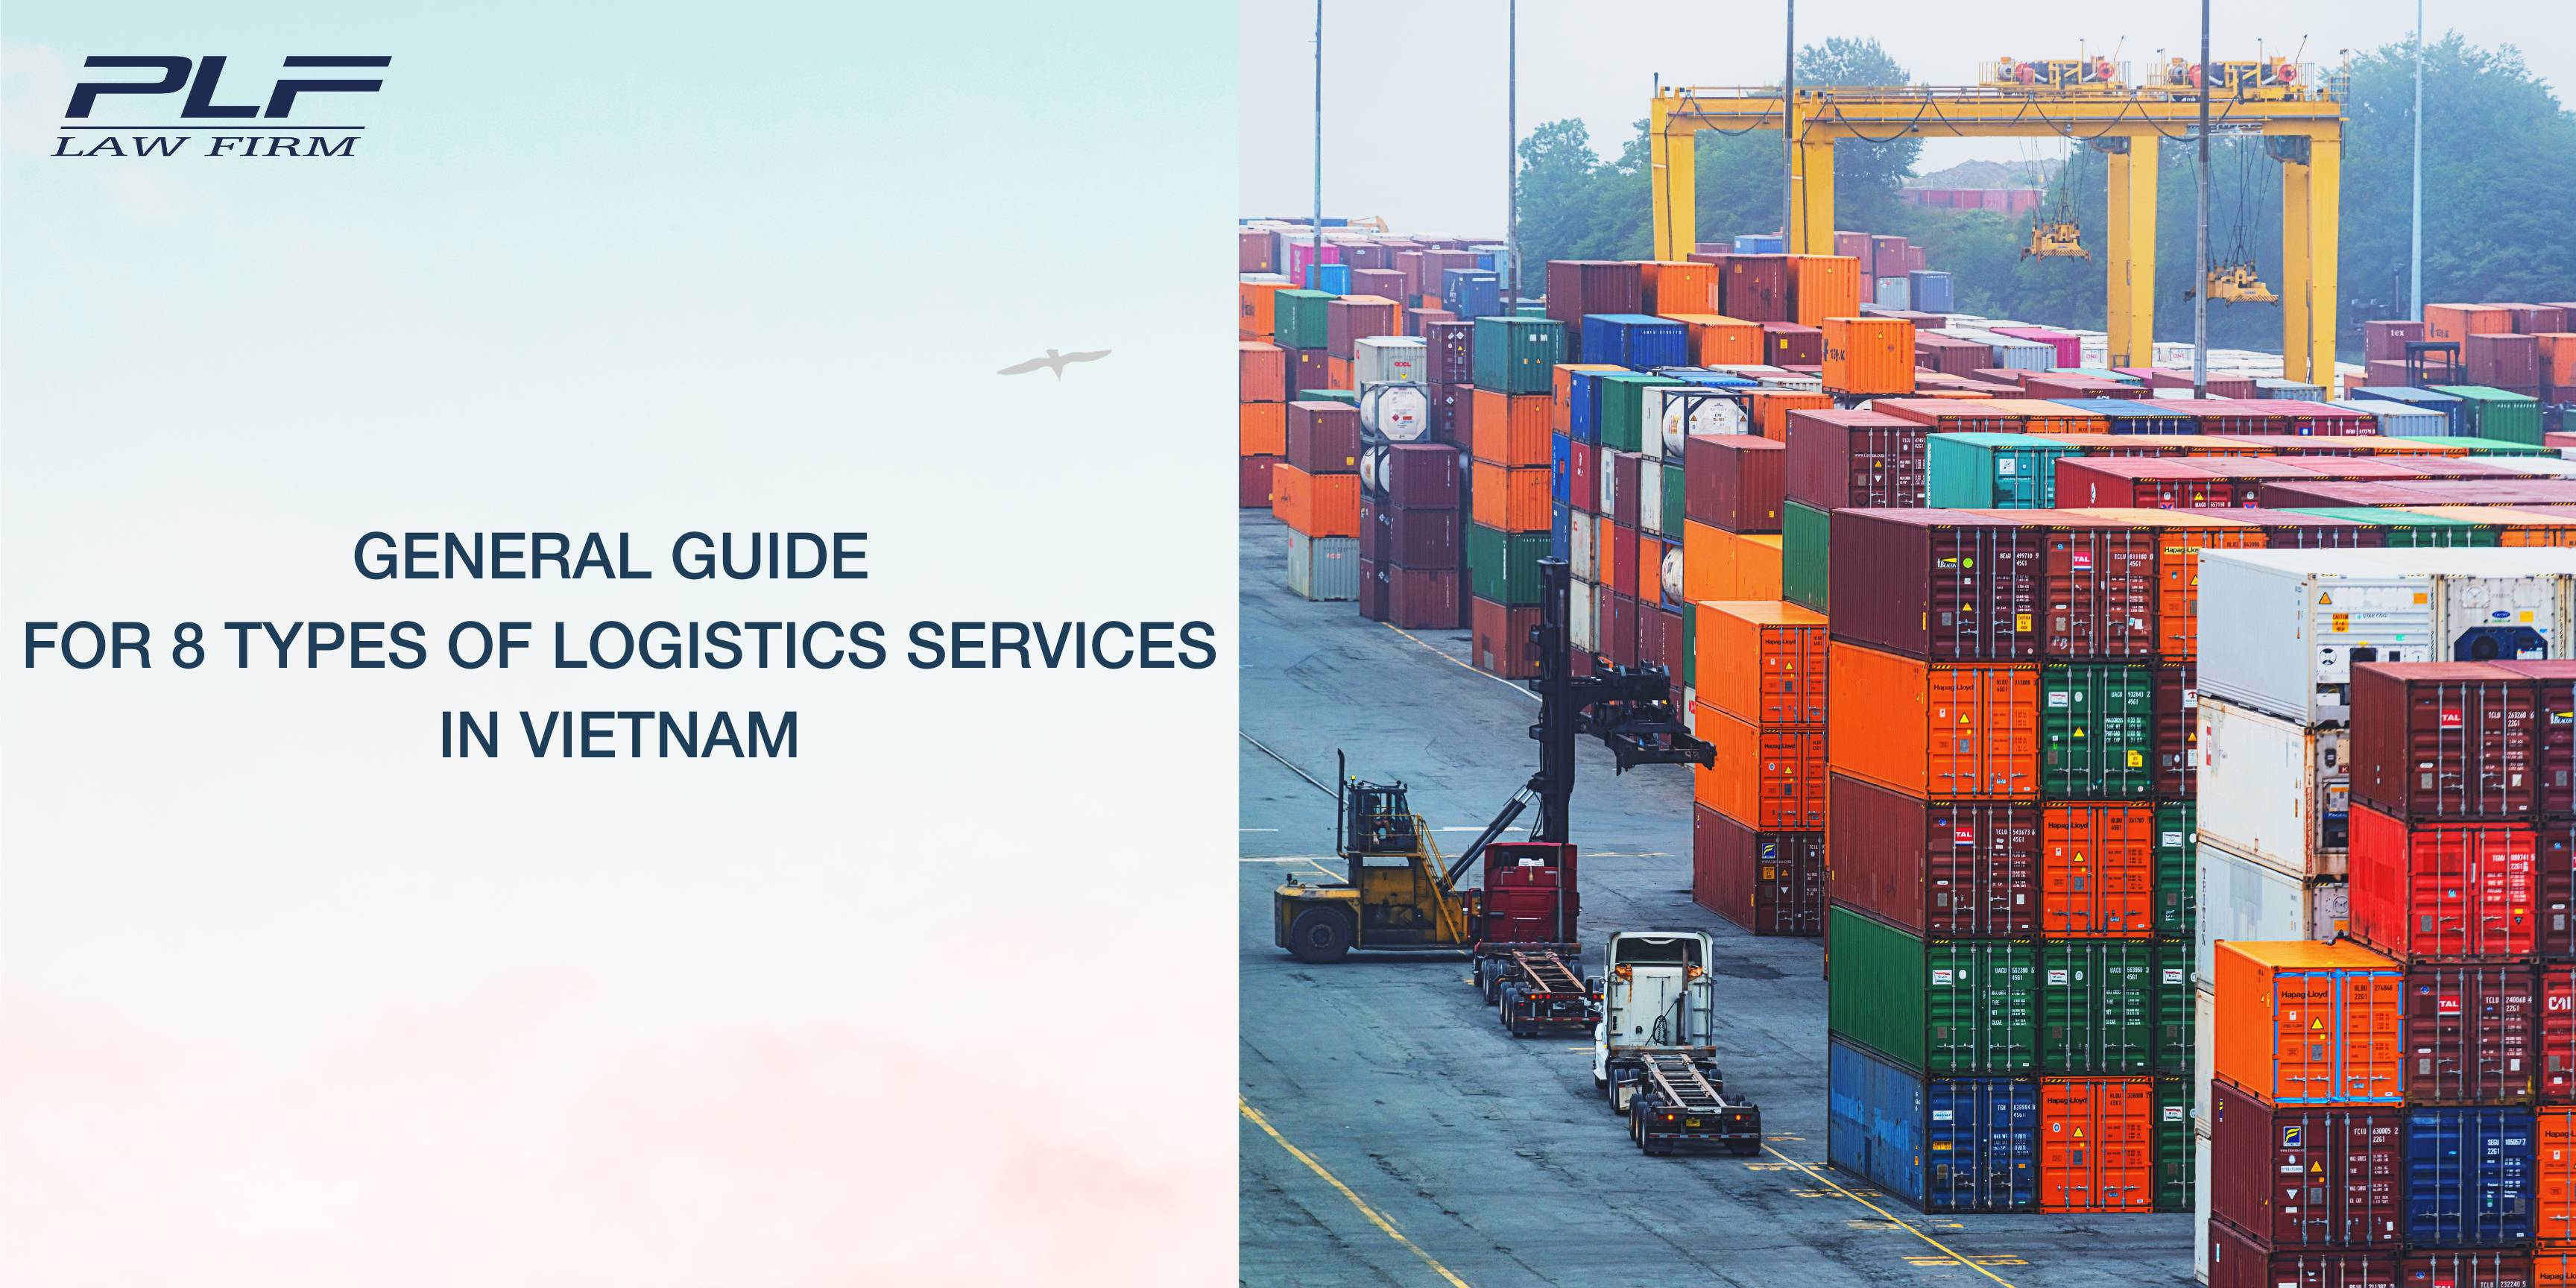 Plf General Guide For 8 Types Of Logistics Services In Vietnam